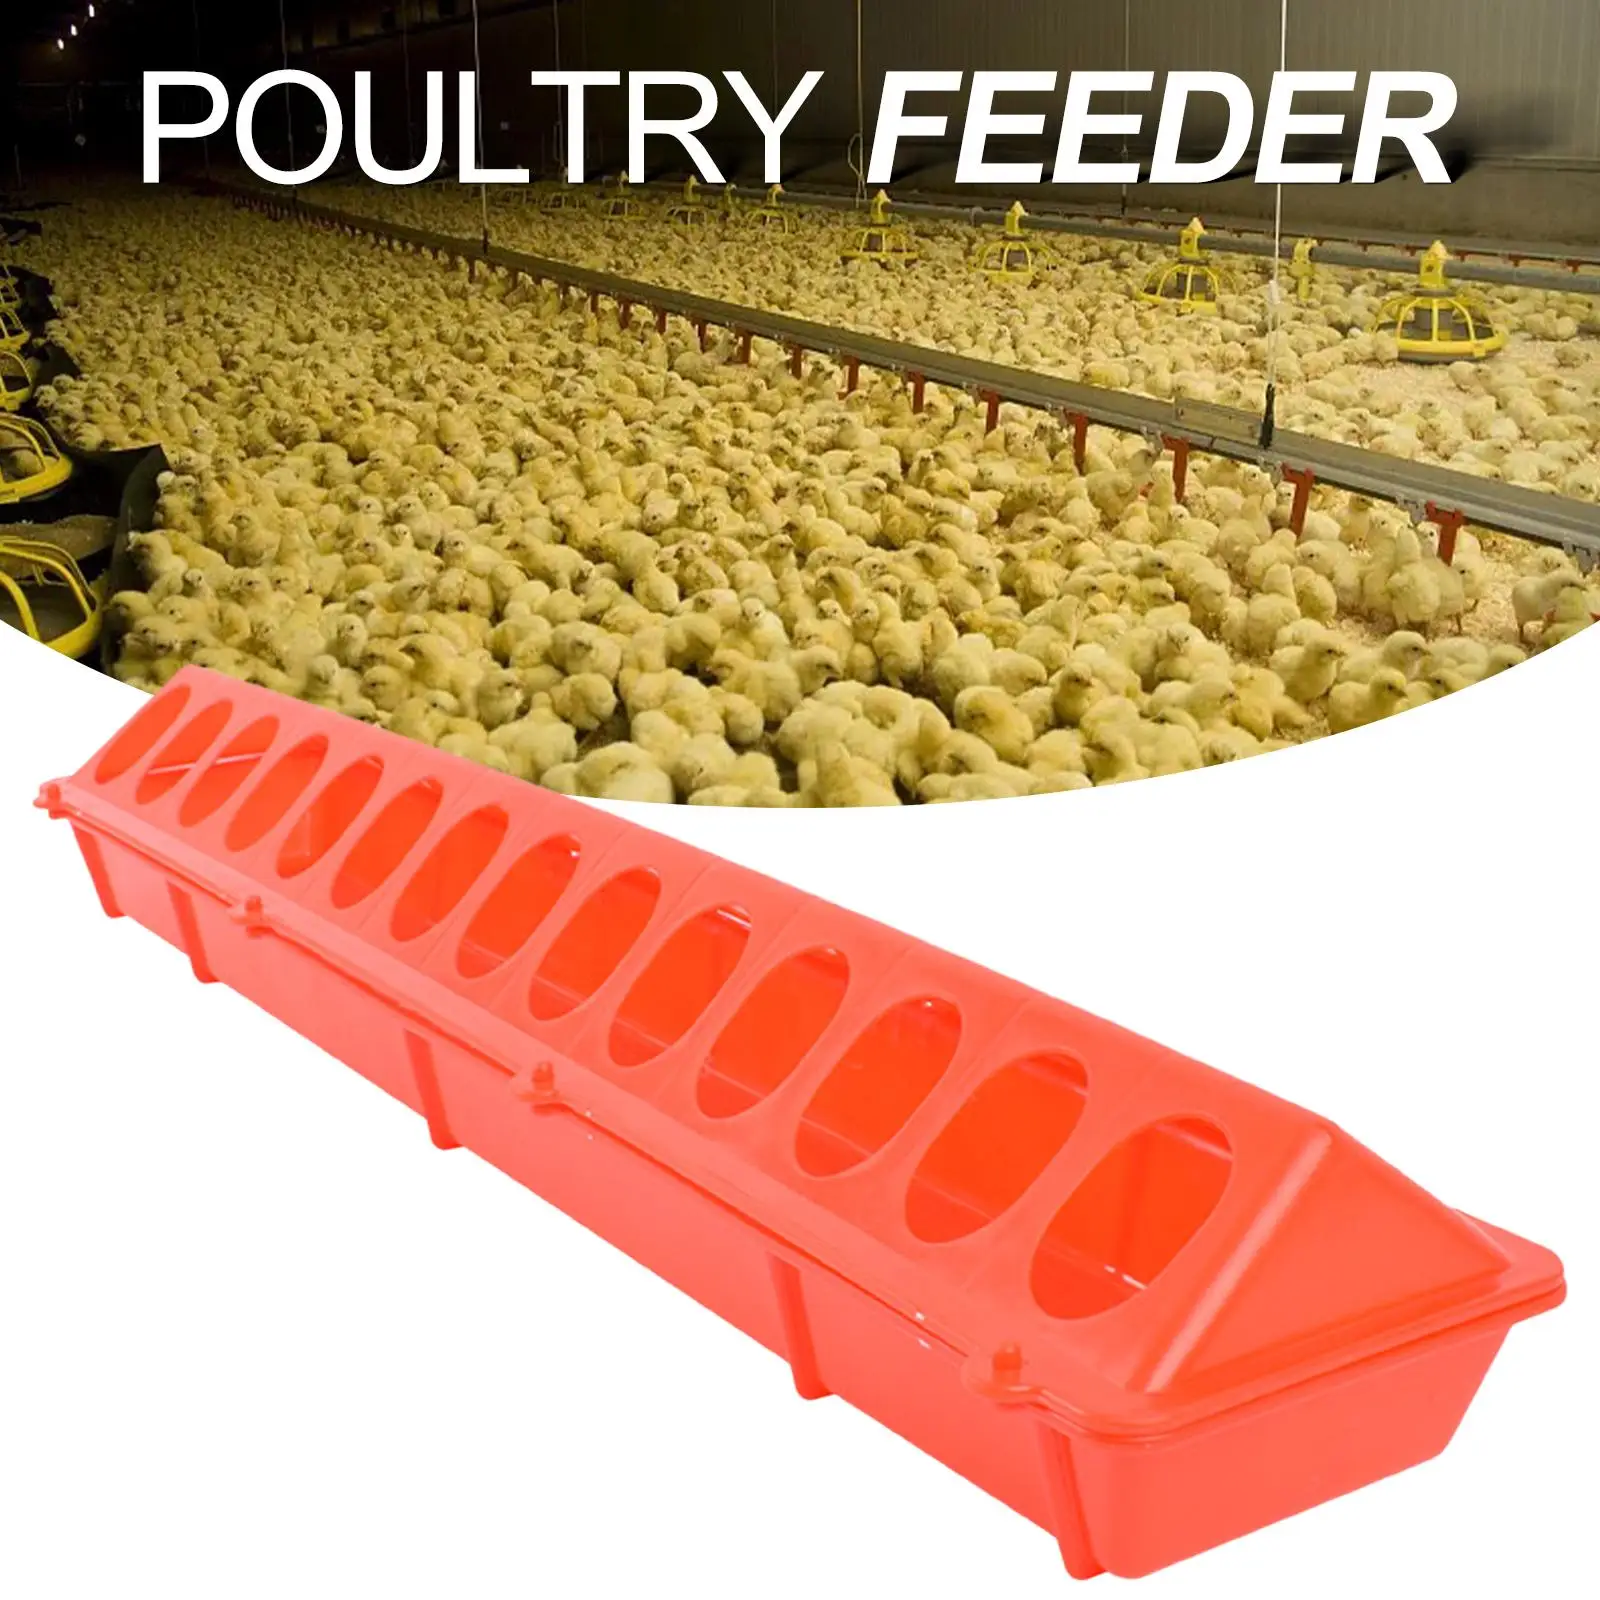 Plastic Flip Top Poultry Feeder Birds feed Long Trough Water Bowl Farming Tool Box for Peacock Pheasants Cockatiels Chick Pigeon